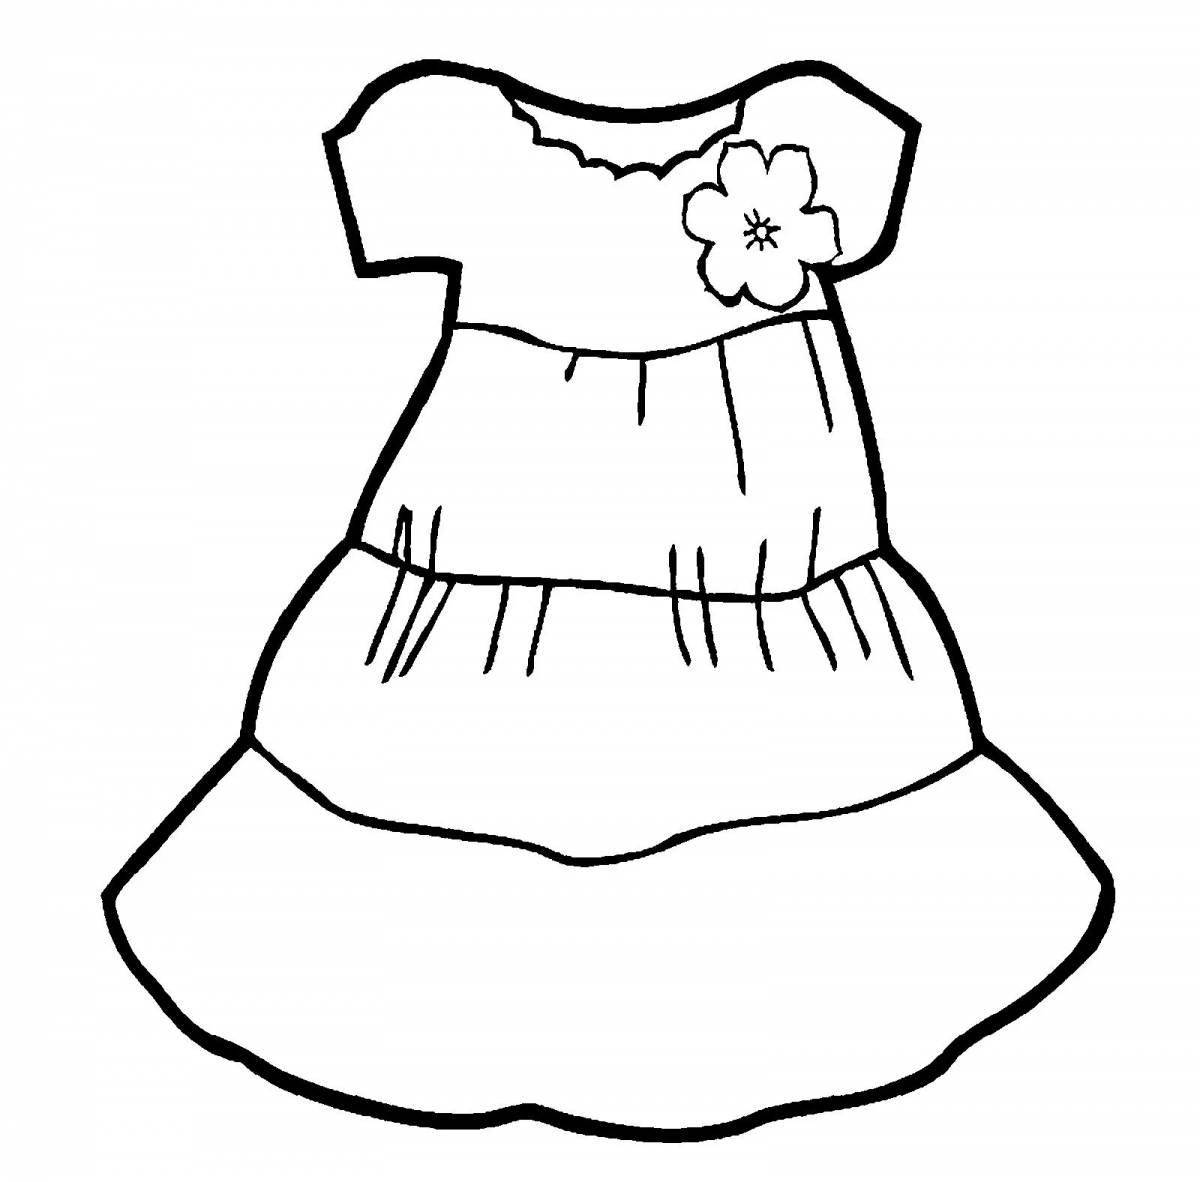 Cheerful sundress coloring for children